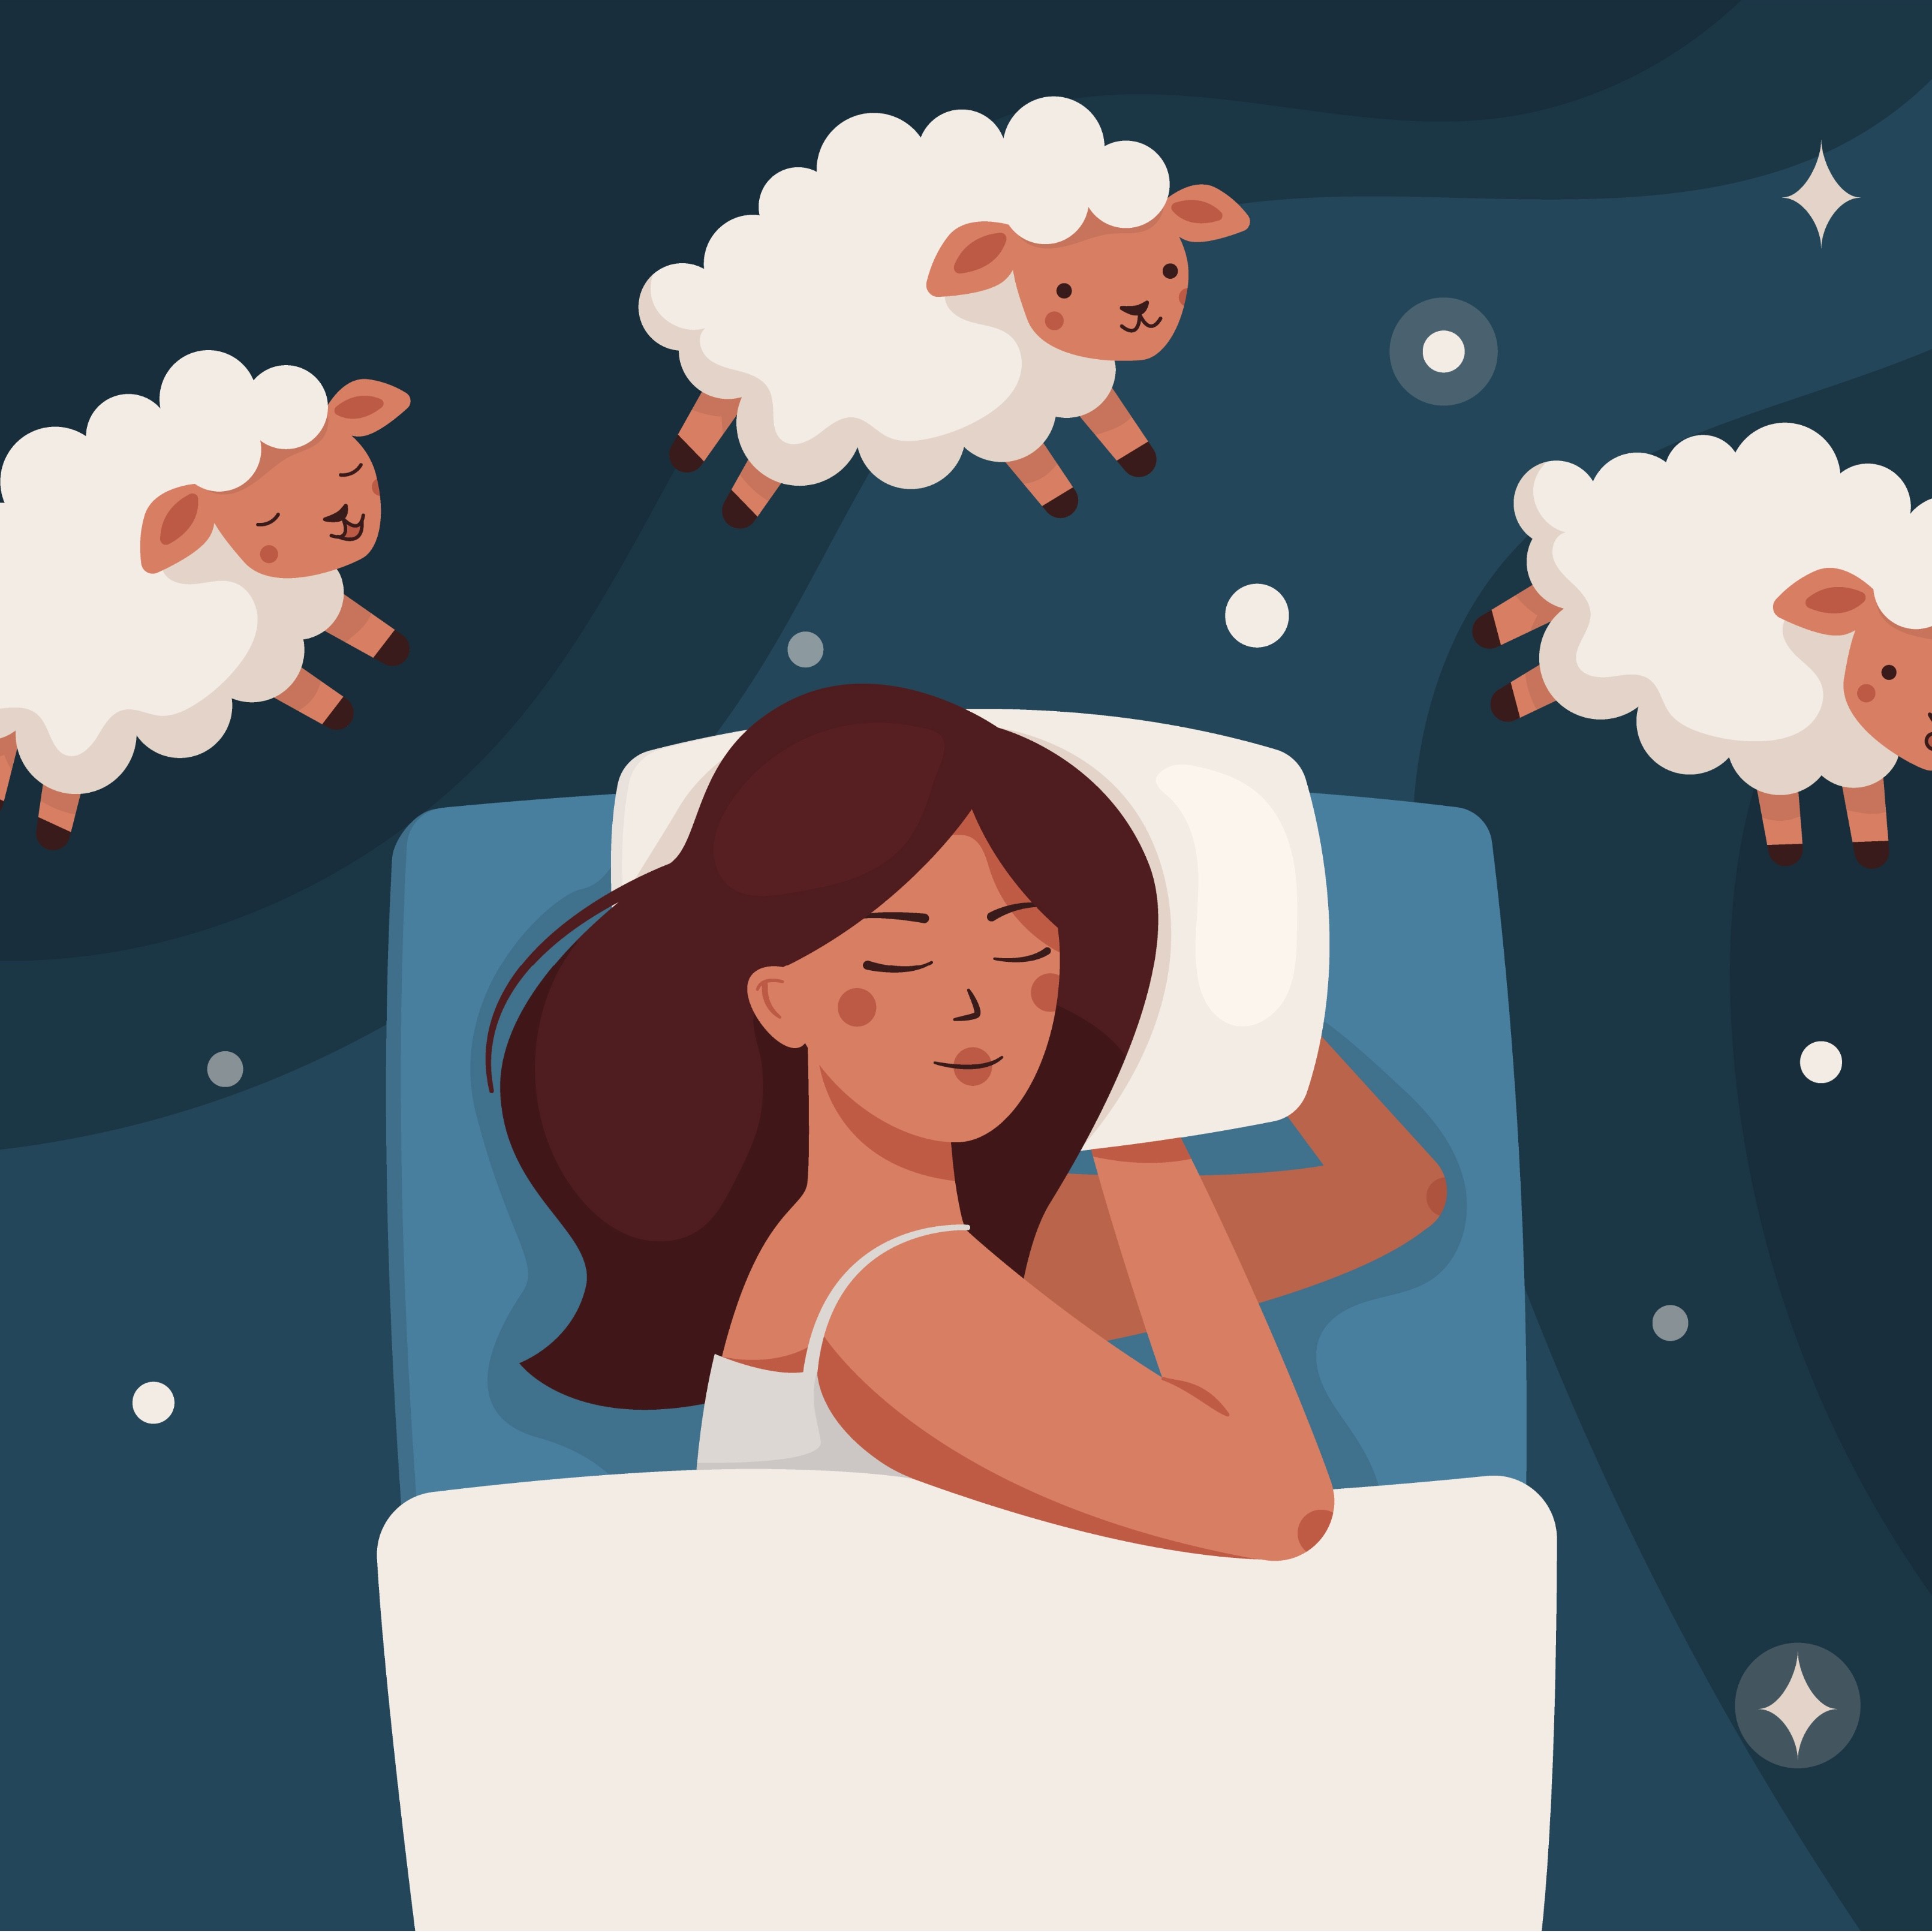 Sleep and stress are interconnected. As we head into finals week, learn practical ways to lower your stress levels and improve your sleep to help you have a successful end of the semester and beyond.